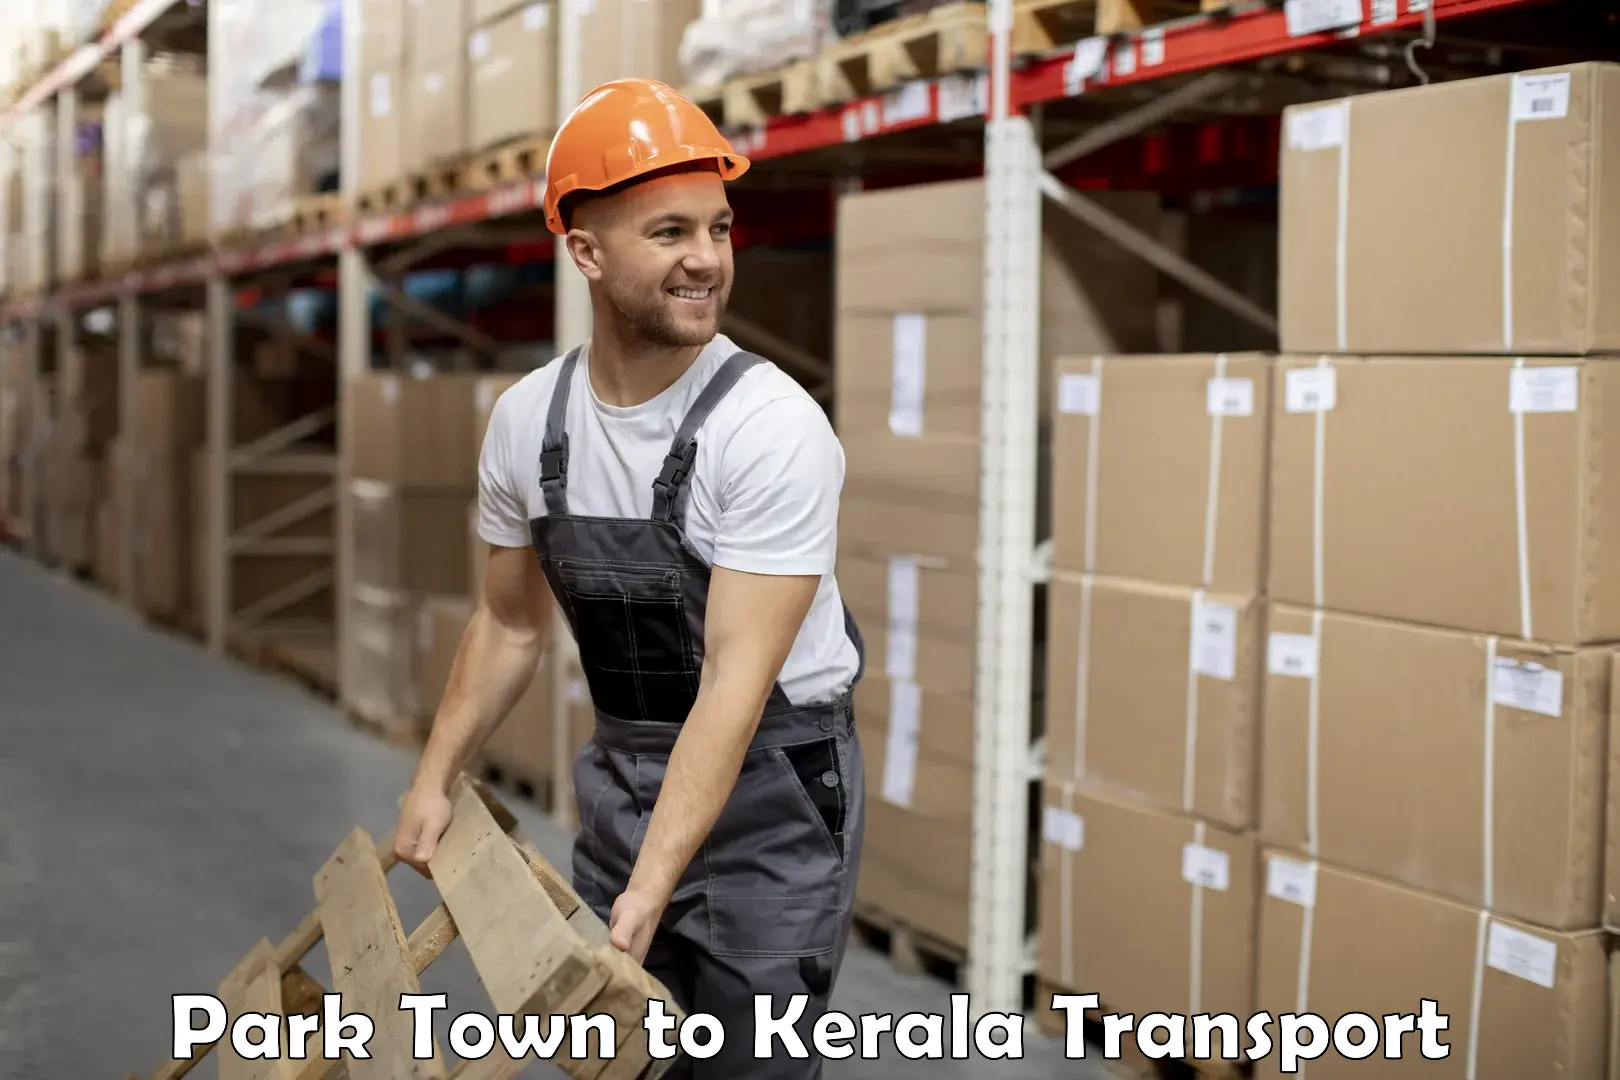 Truck transport companies in India Park Town to Kerala